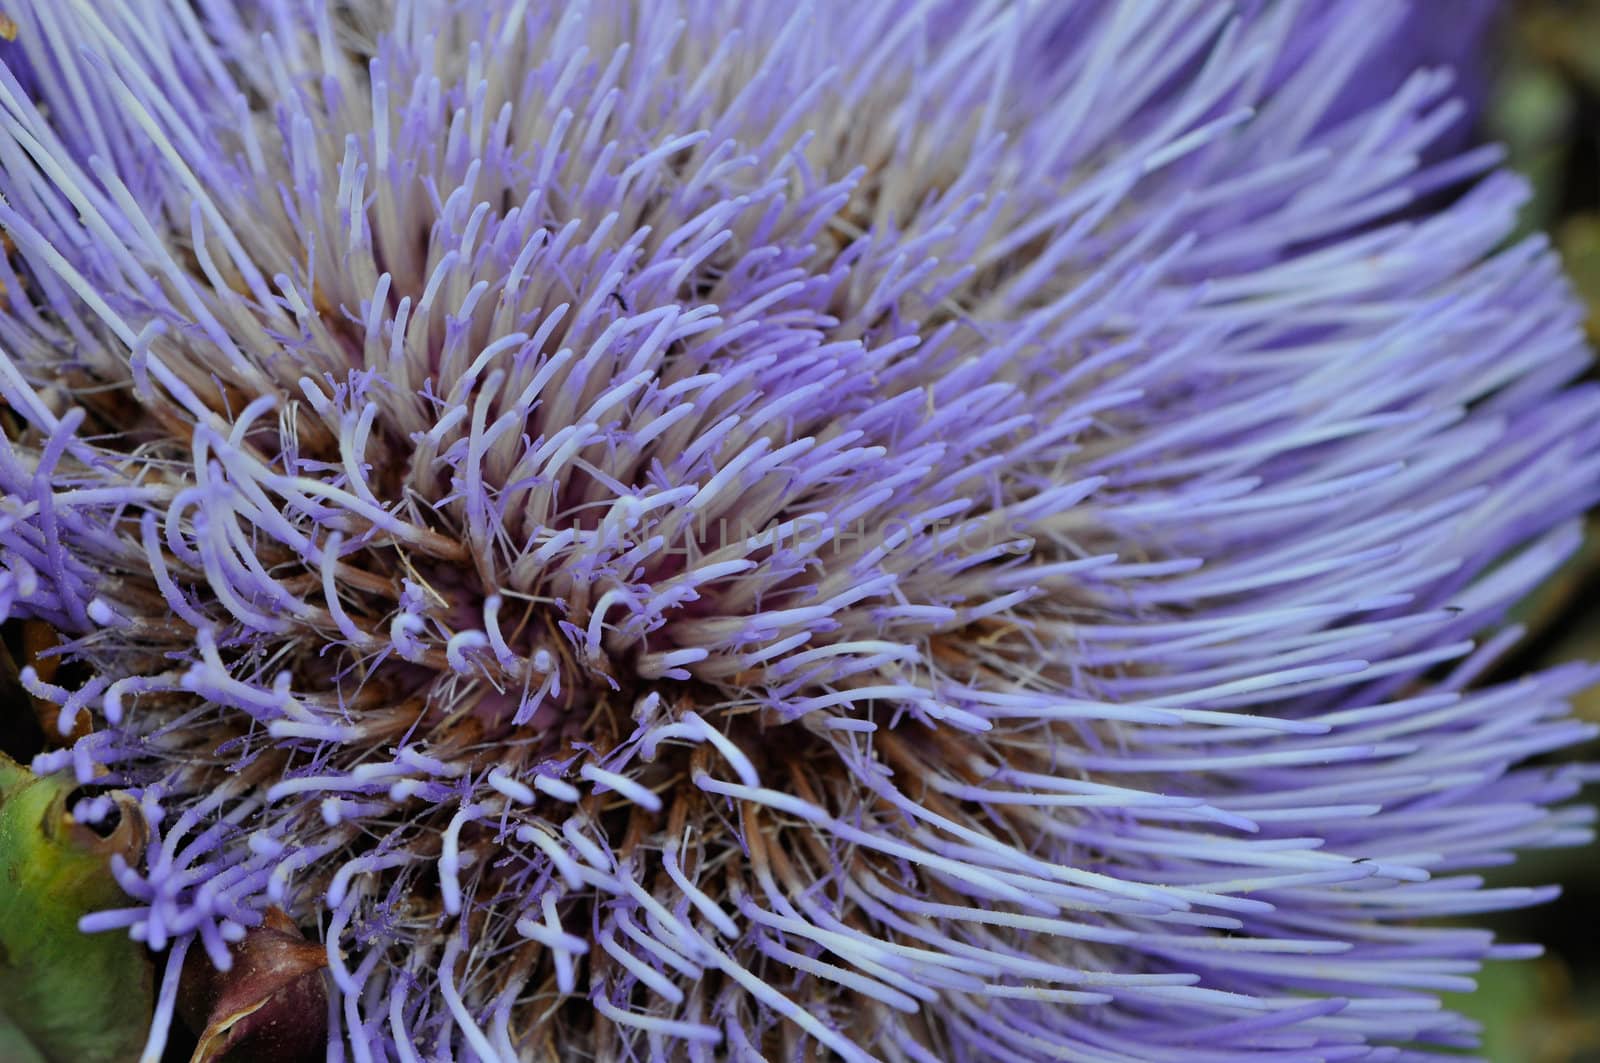 Extreme close-up of a purple articoke flower by shkyo30